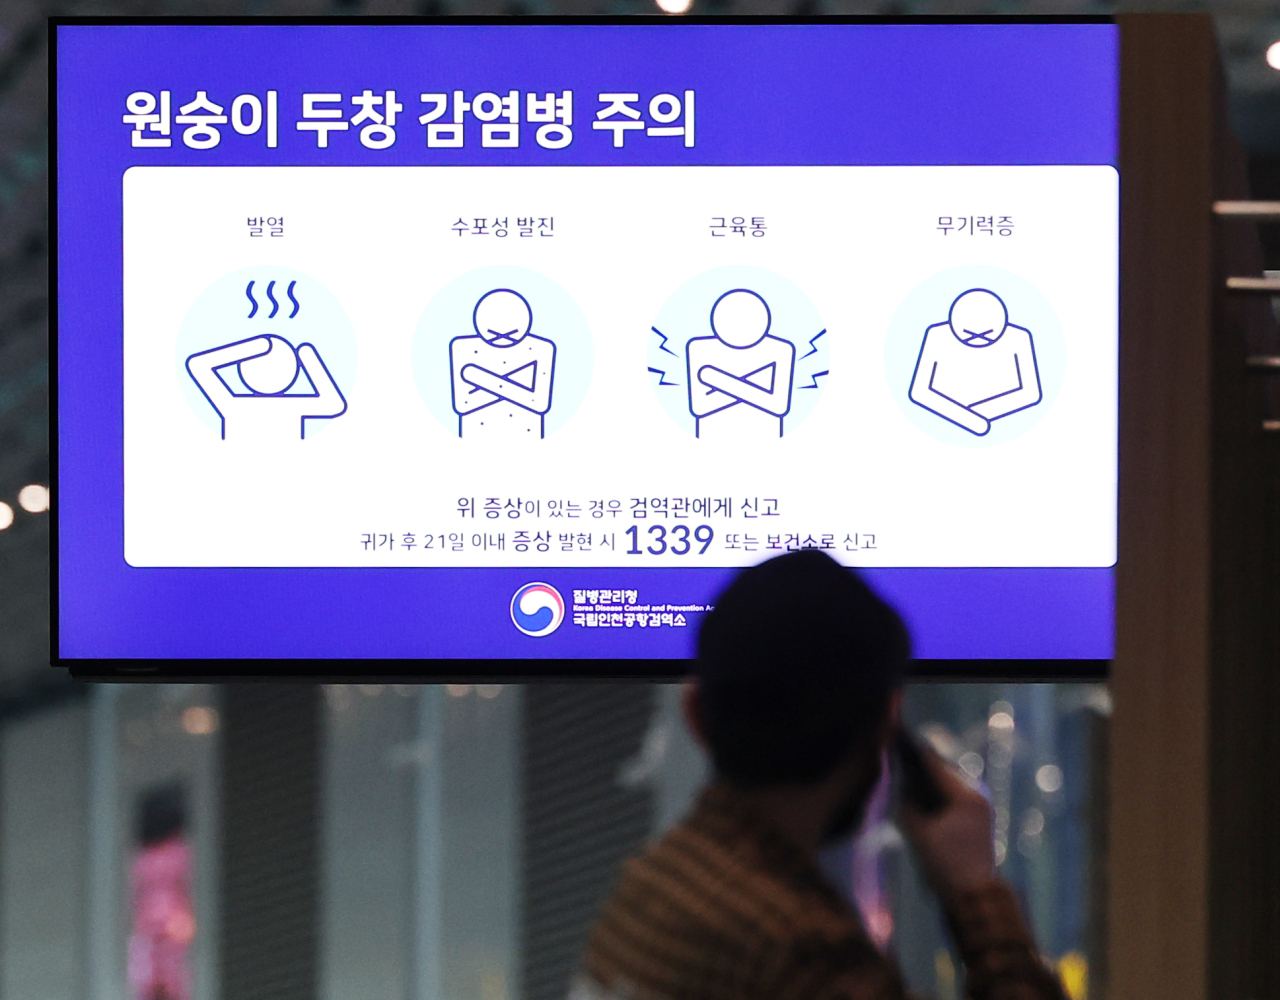 A sign shows symptoms of monkeypox at Incheon International Airport on June 30. (Yonhap)